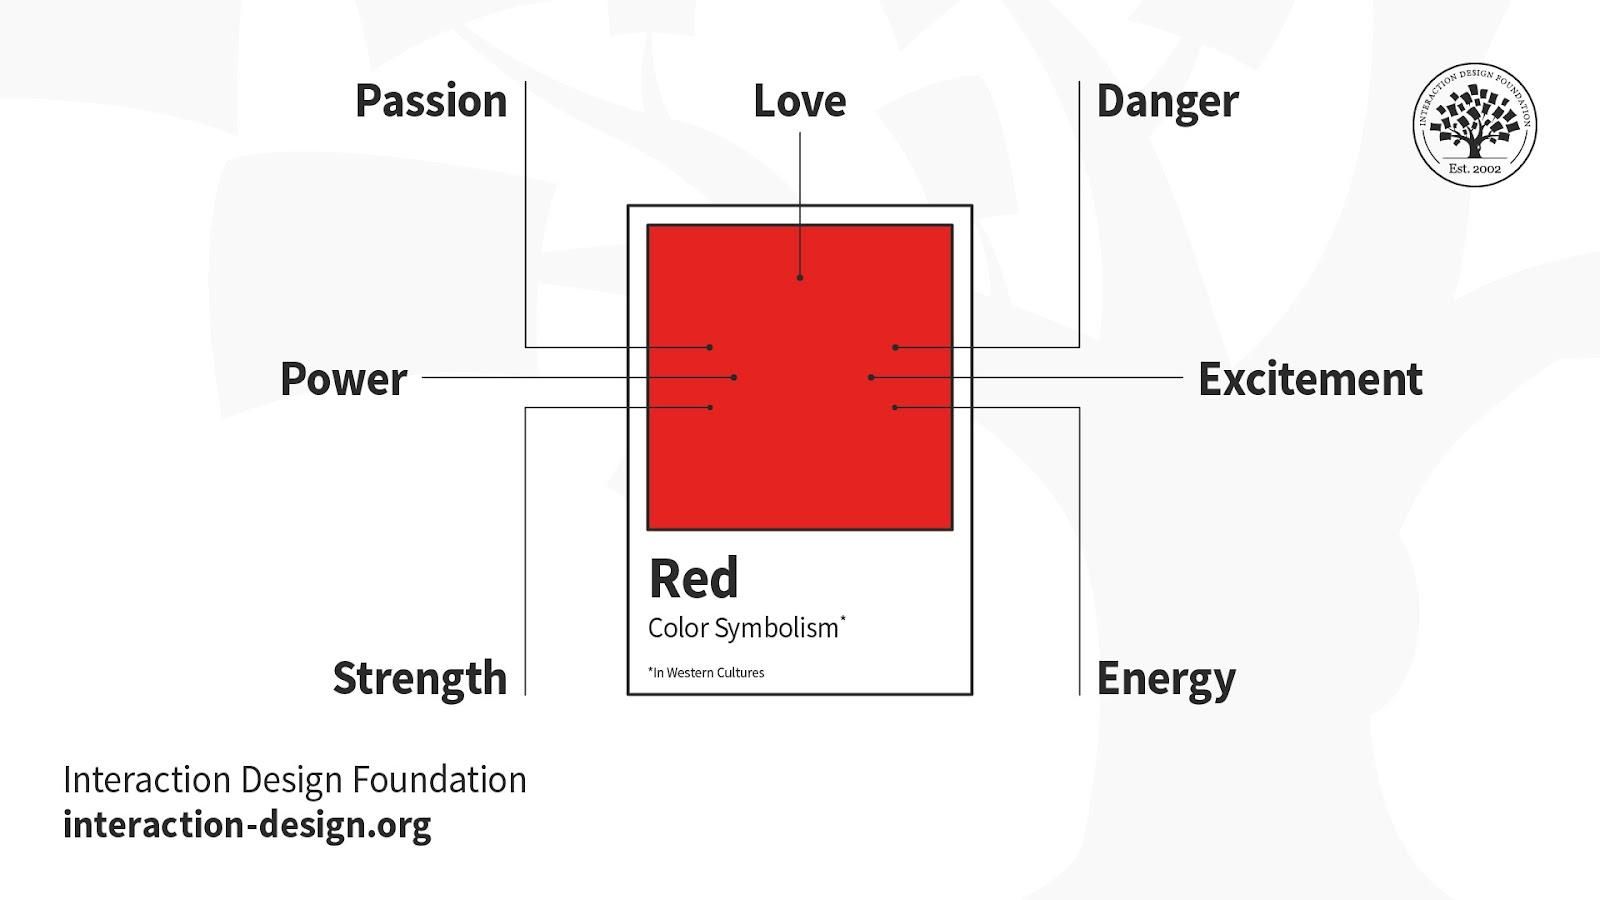 Illustration depicting key words symbolized by the color red